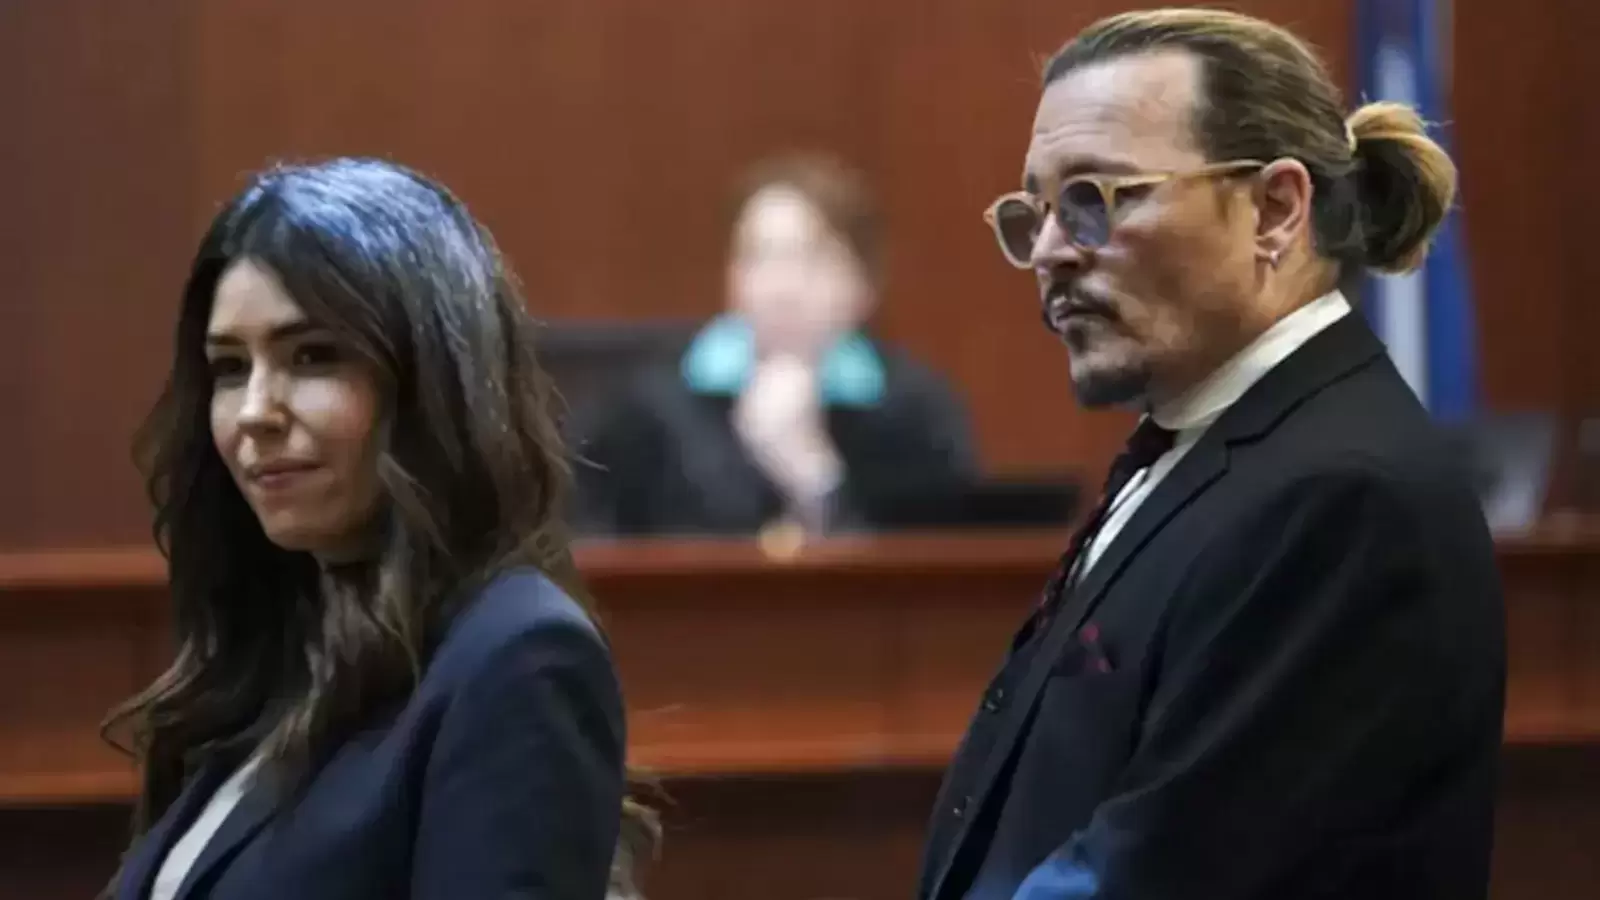 Johnny Depp’s lawyer Camille Vasquez gets promotion at her firm, week after actor’s win in defamation case